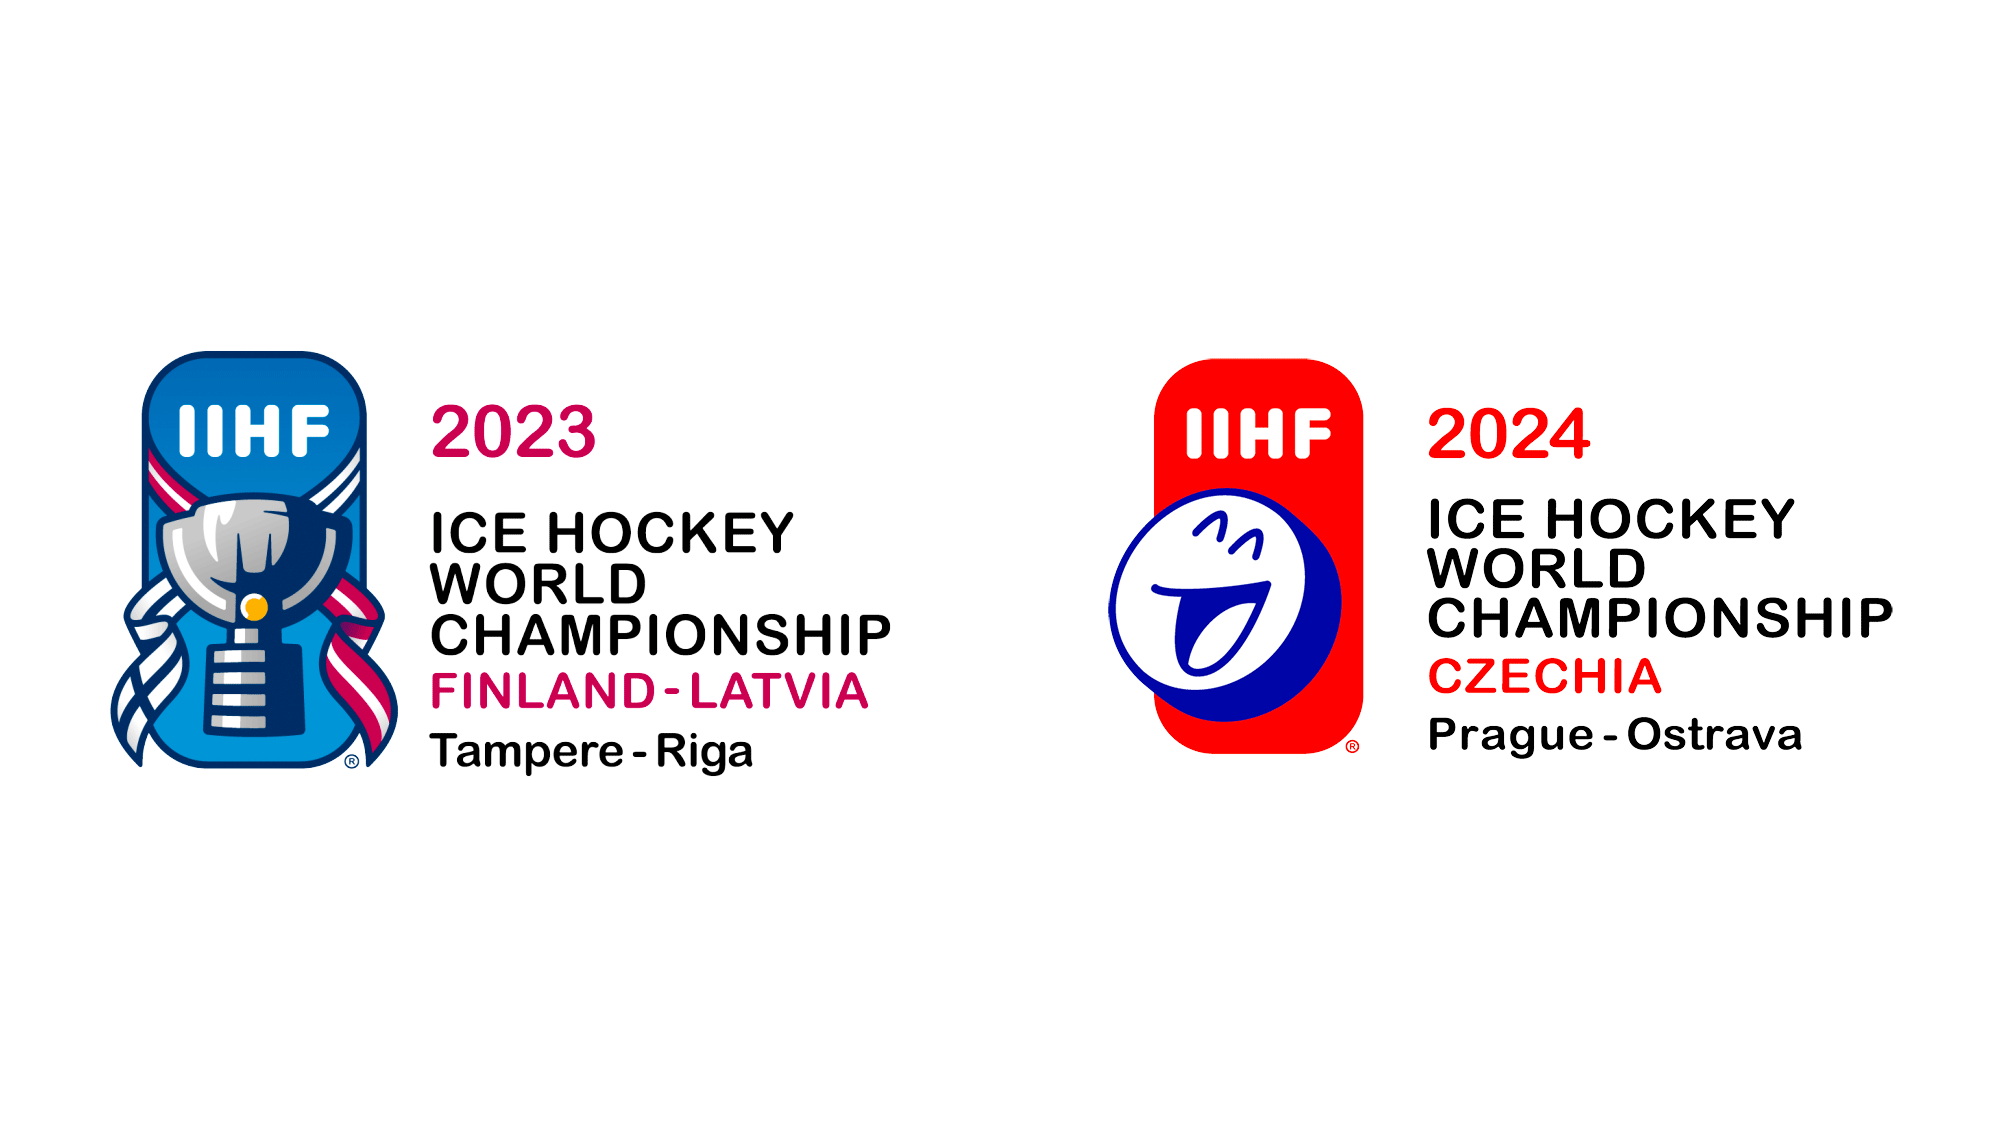 2024 IIHF Championship Logo Before After 